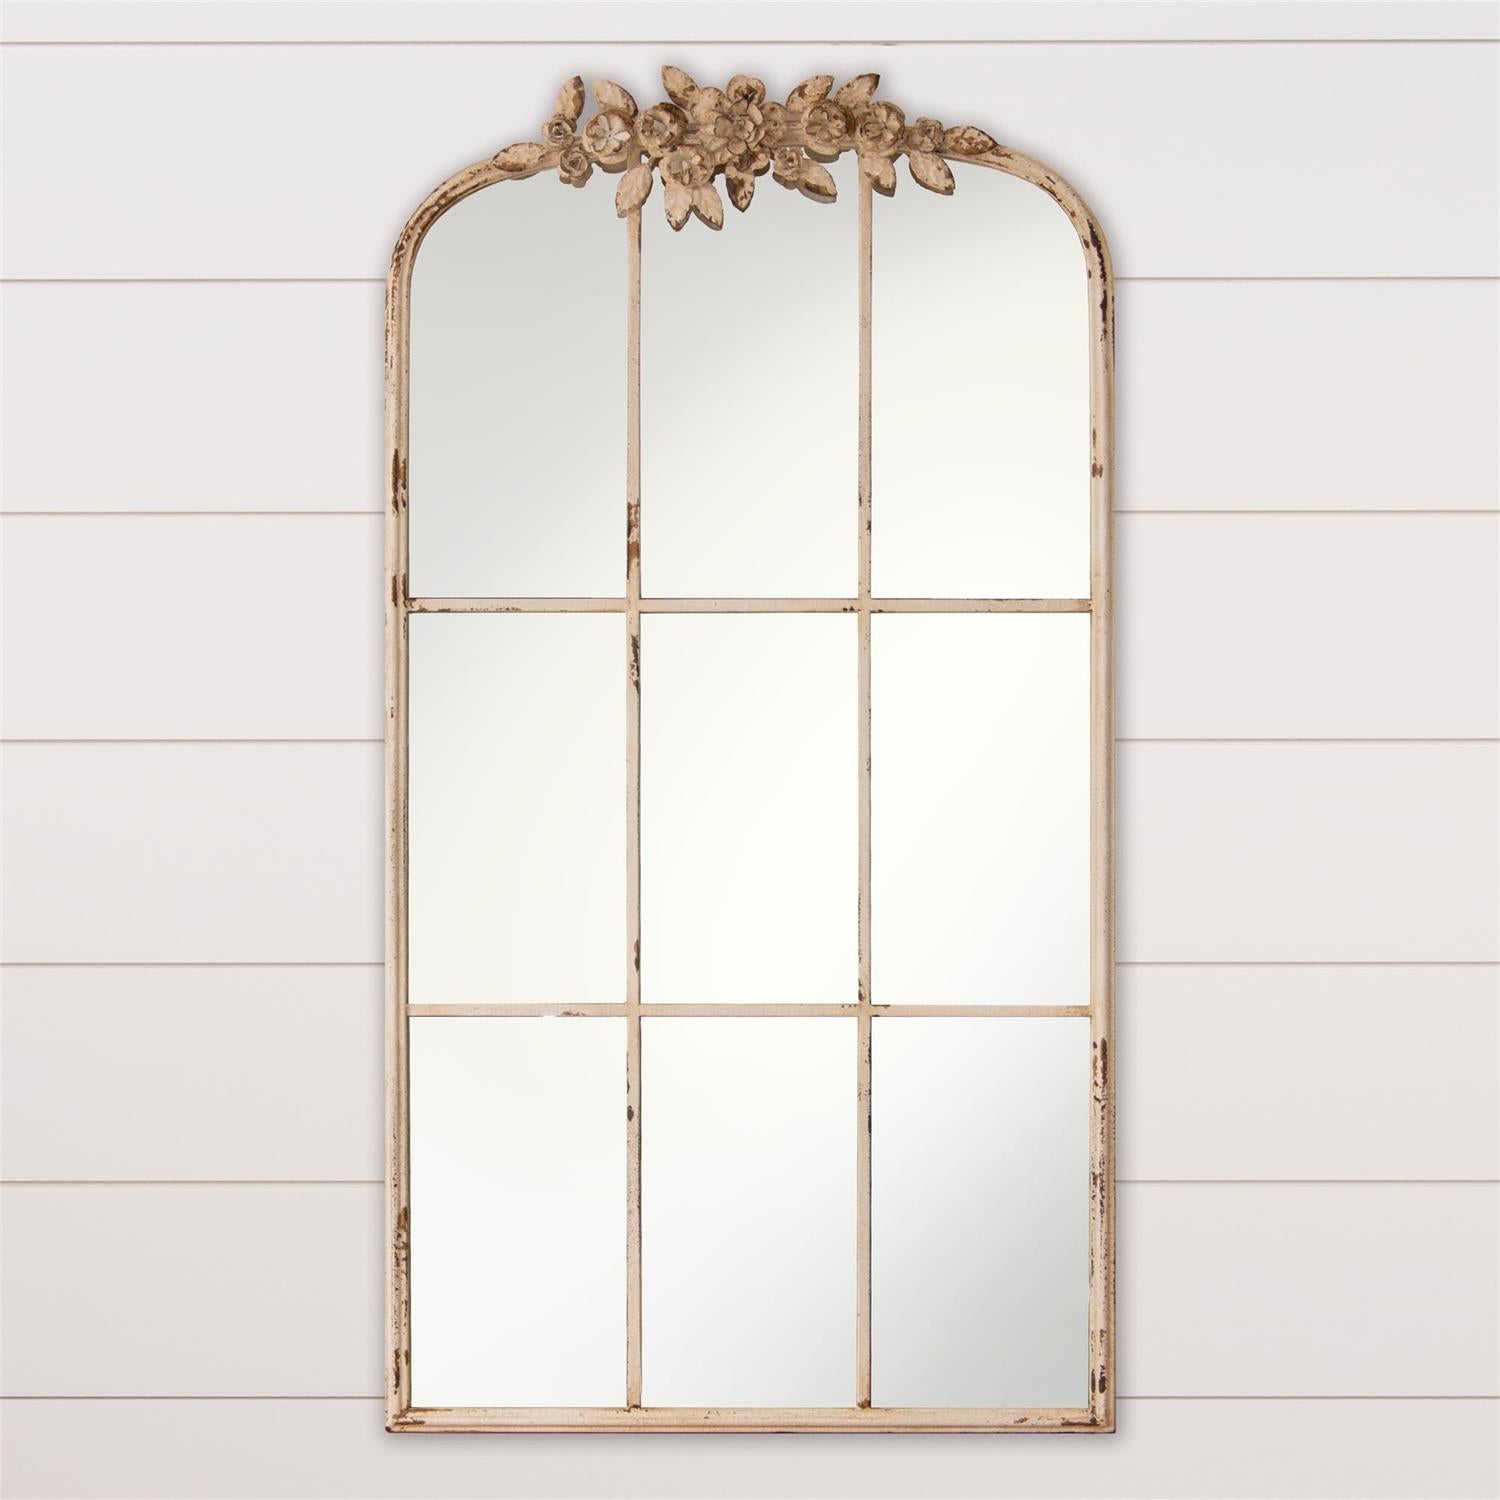 Mirror - Floral Accented Arched Windowpane